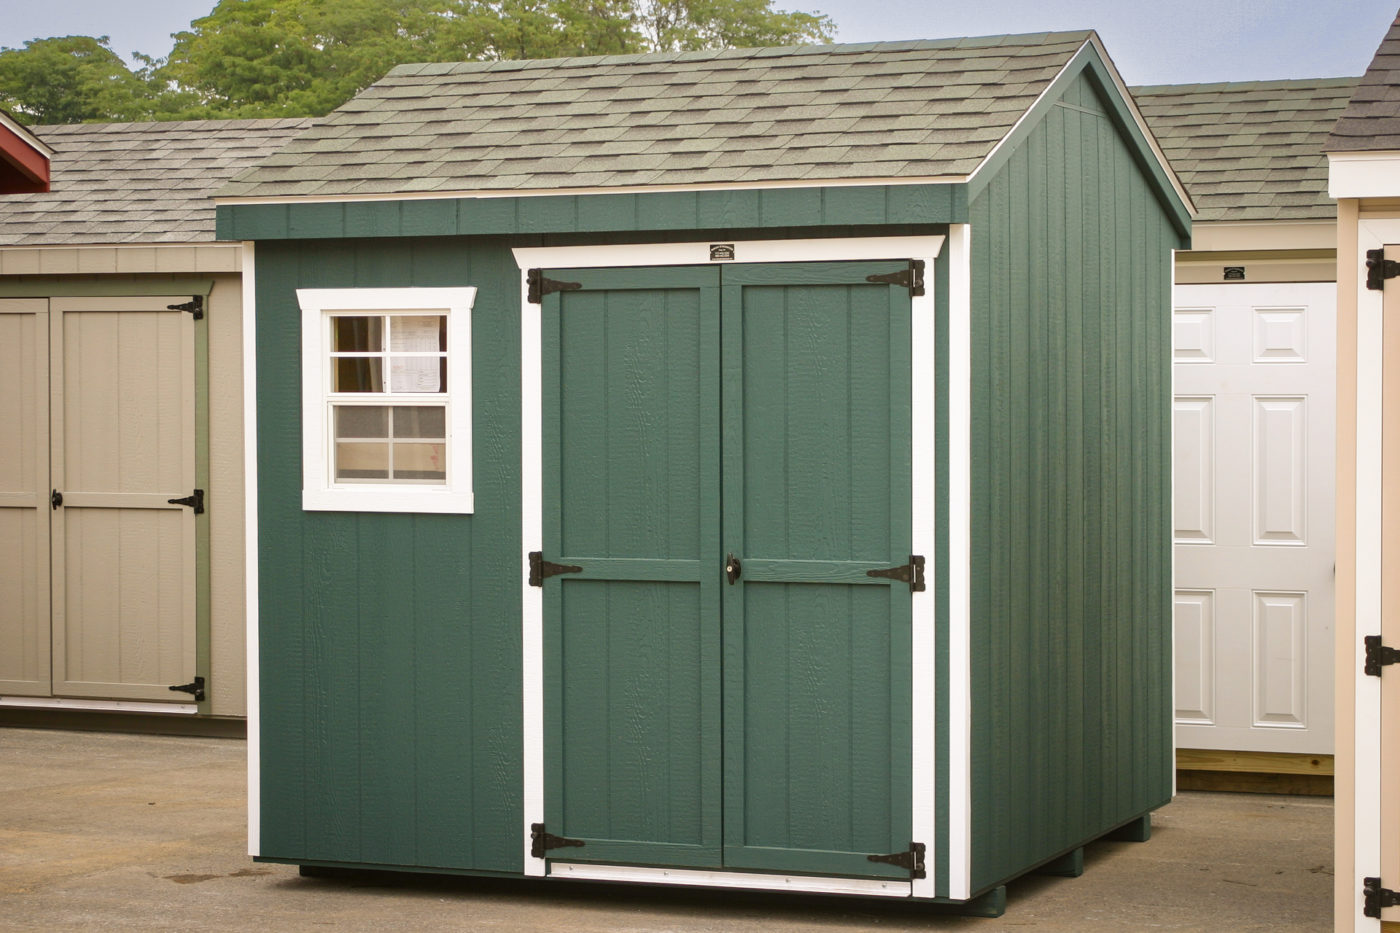 A small shed with green siding